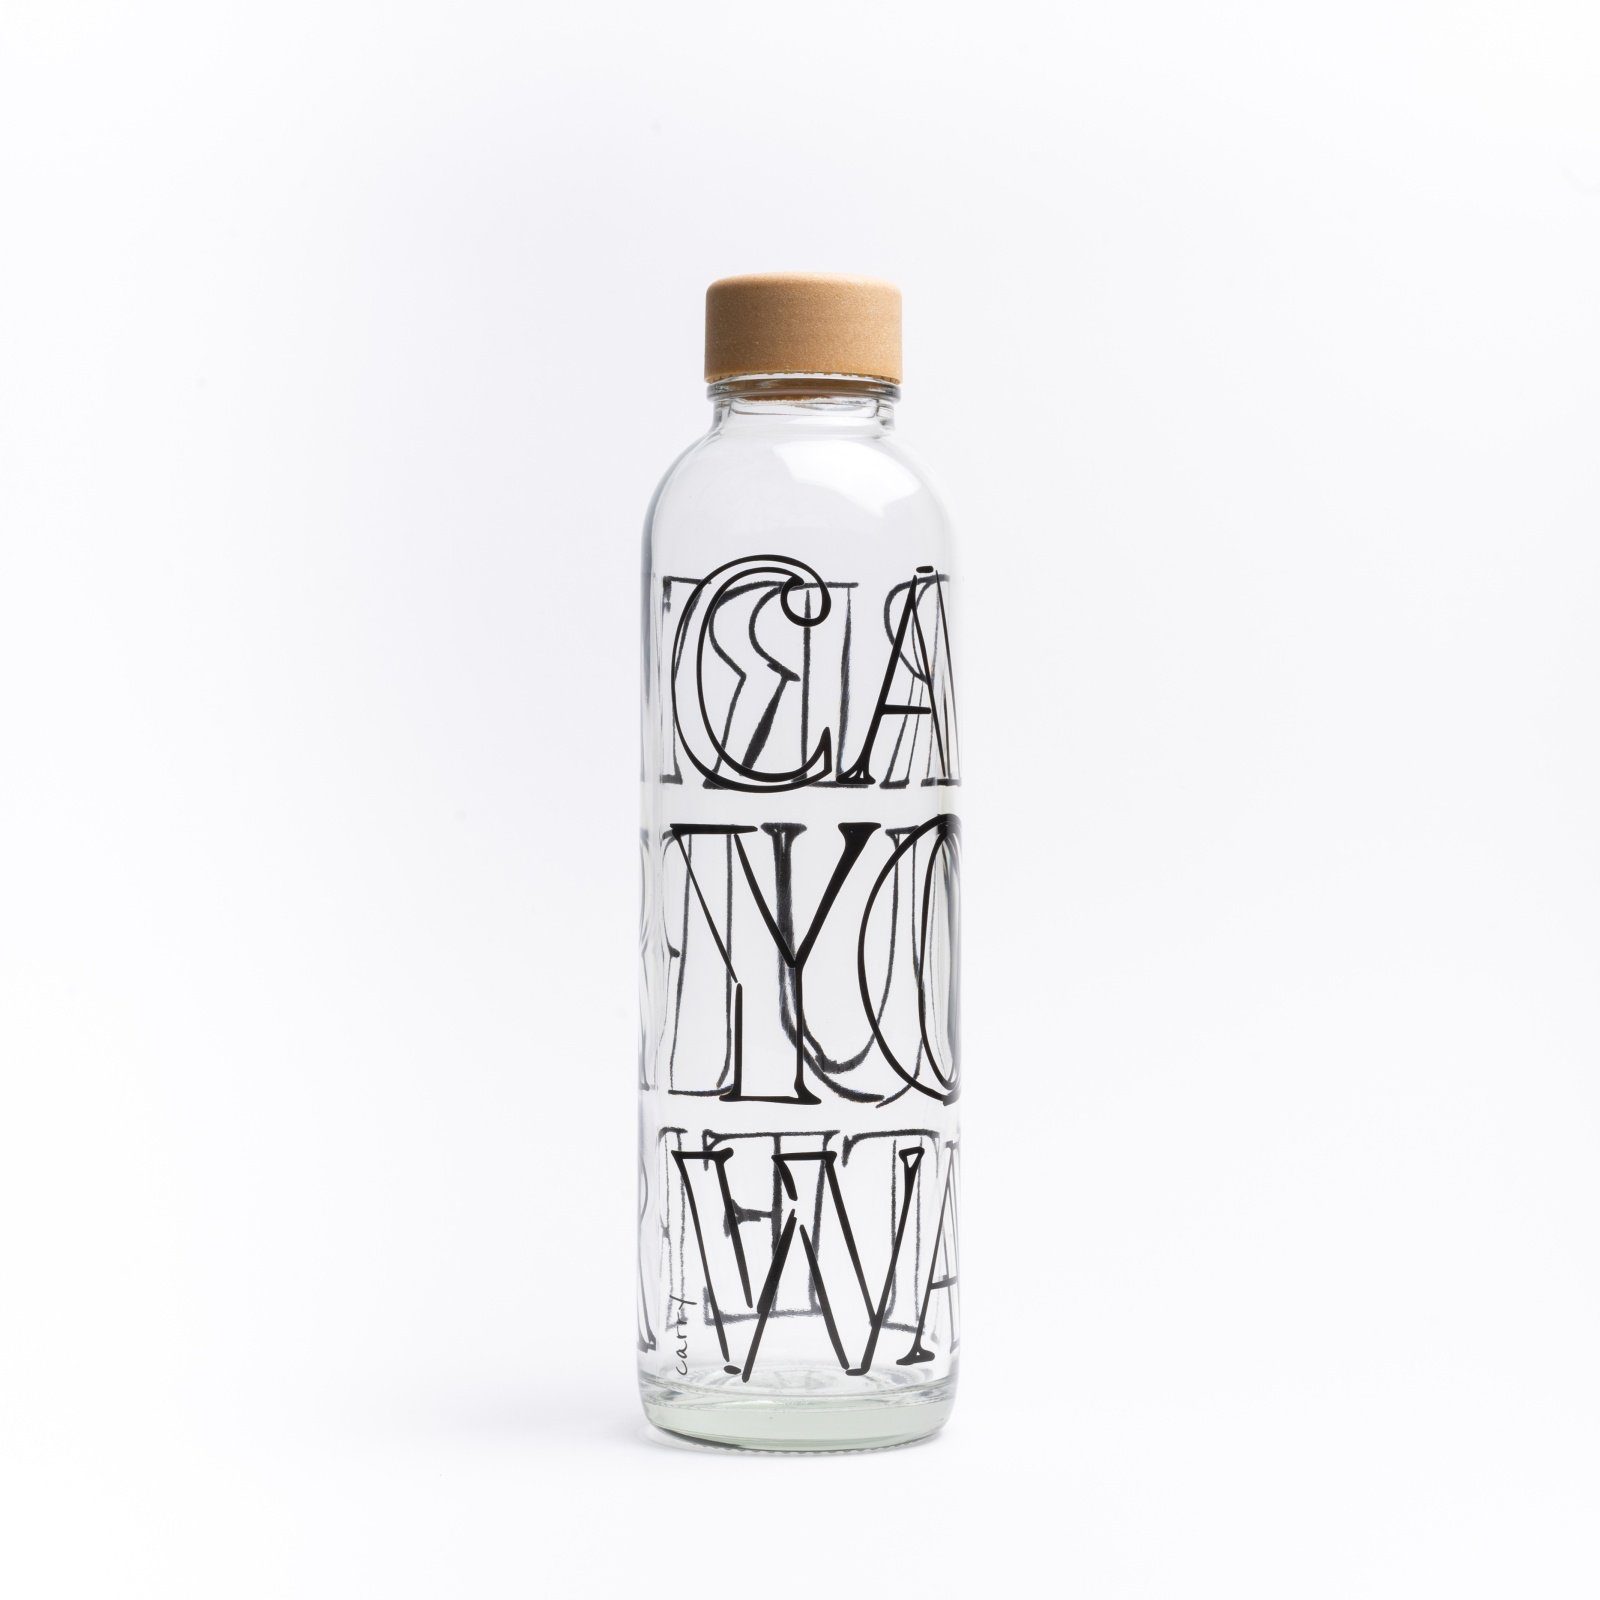 Trinkflasche CARRY 0.7 l CARRY YOUR WATER GLAS, Regional produziert